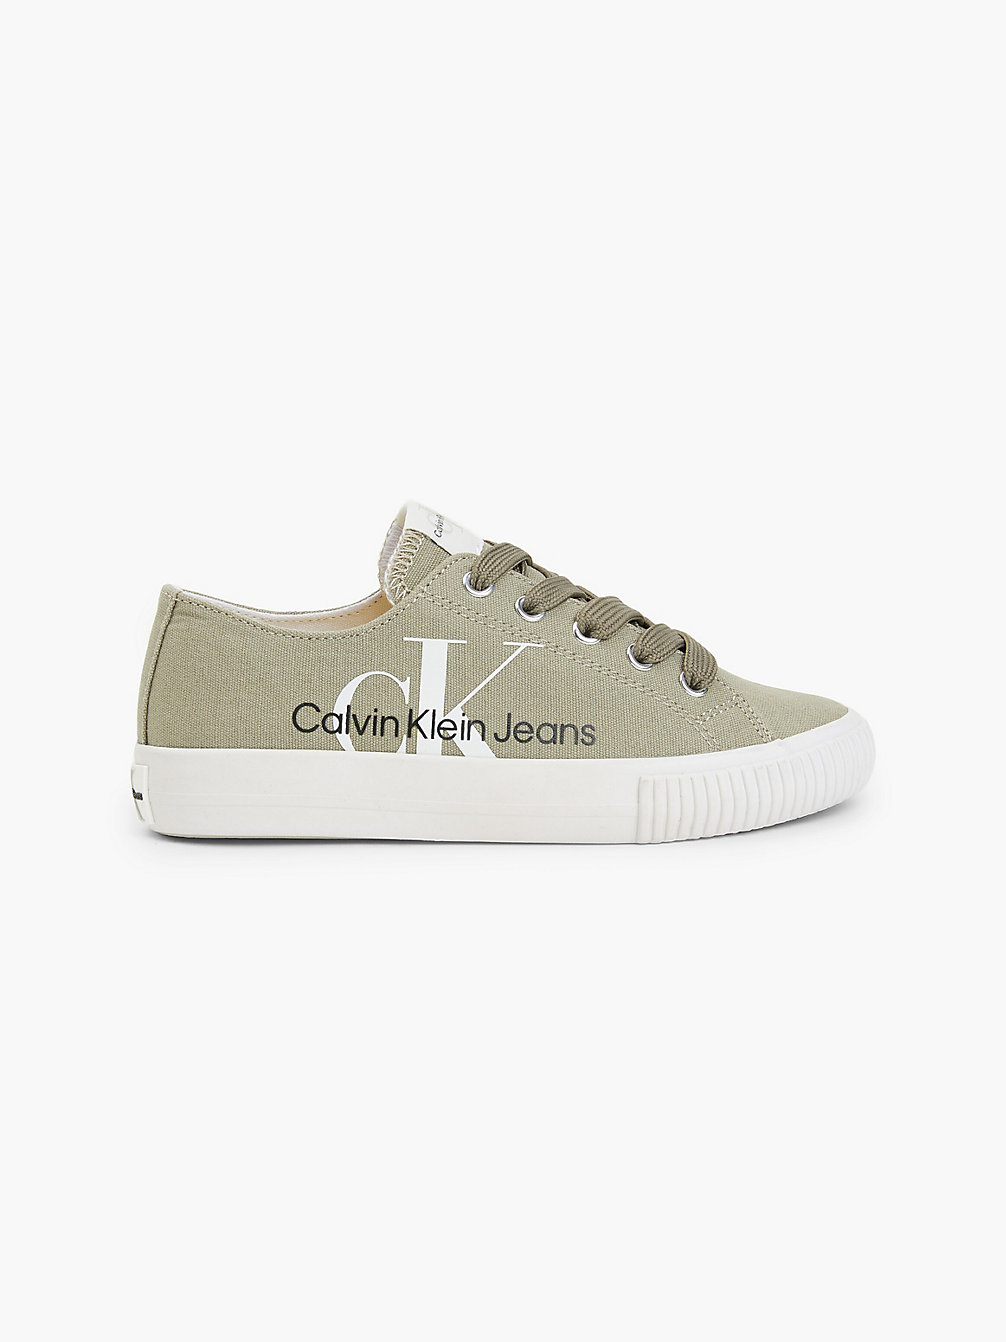 MILITARY GREEN Recycelte Canvas-Sneakers undefined kids unisex Calvin Klein